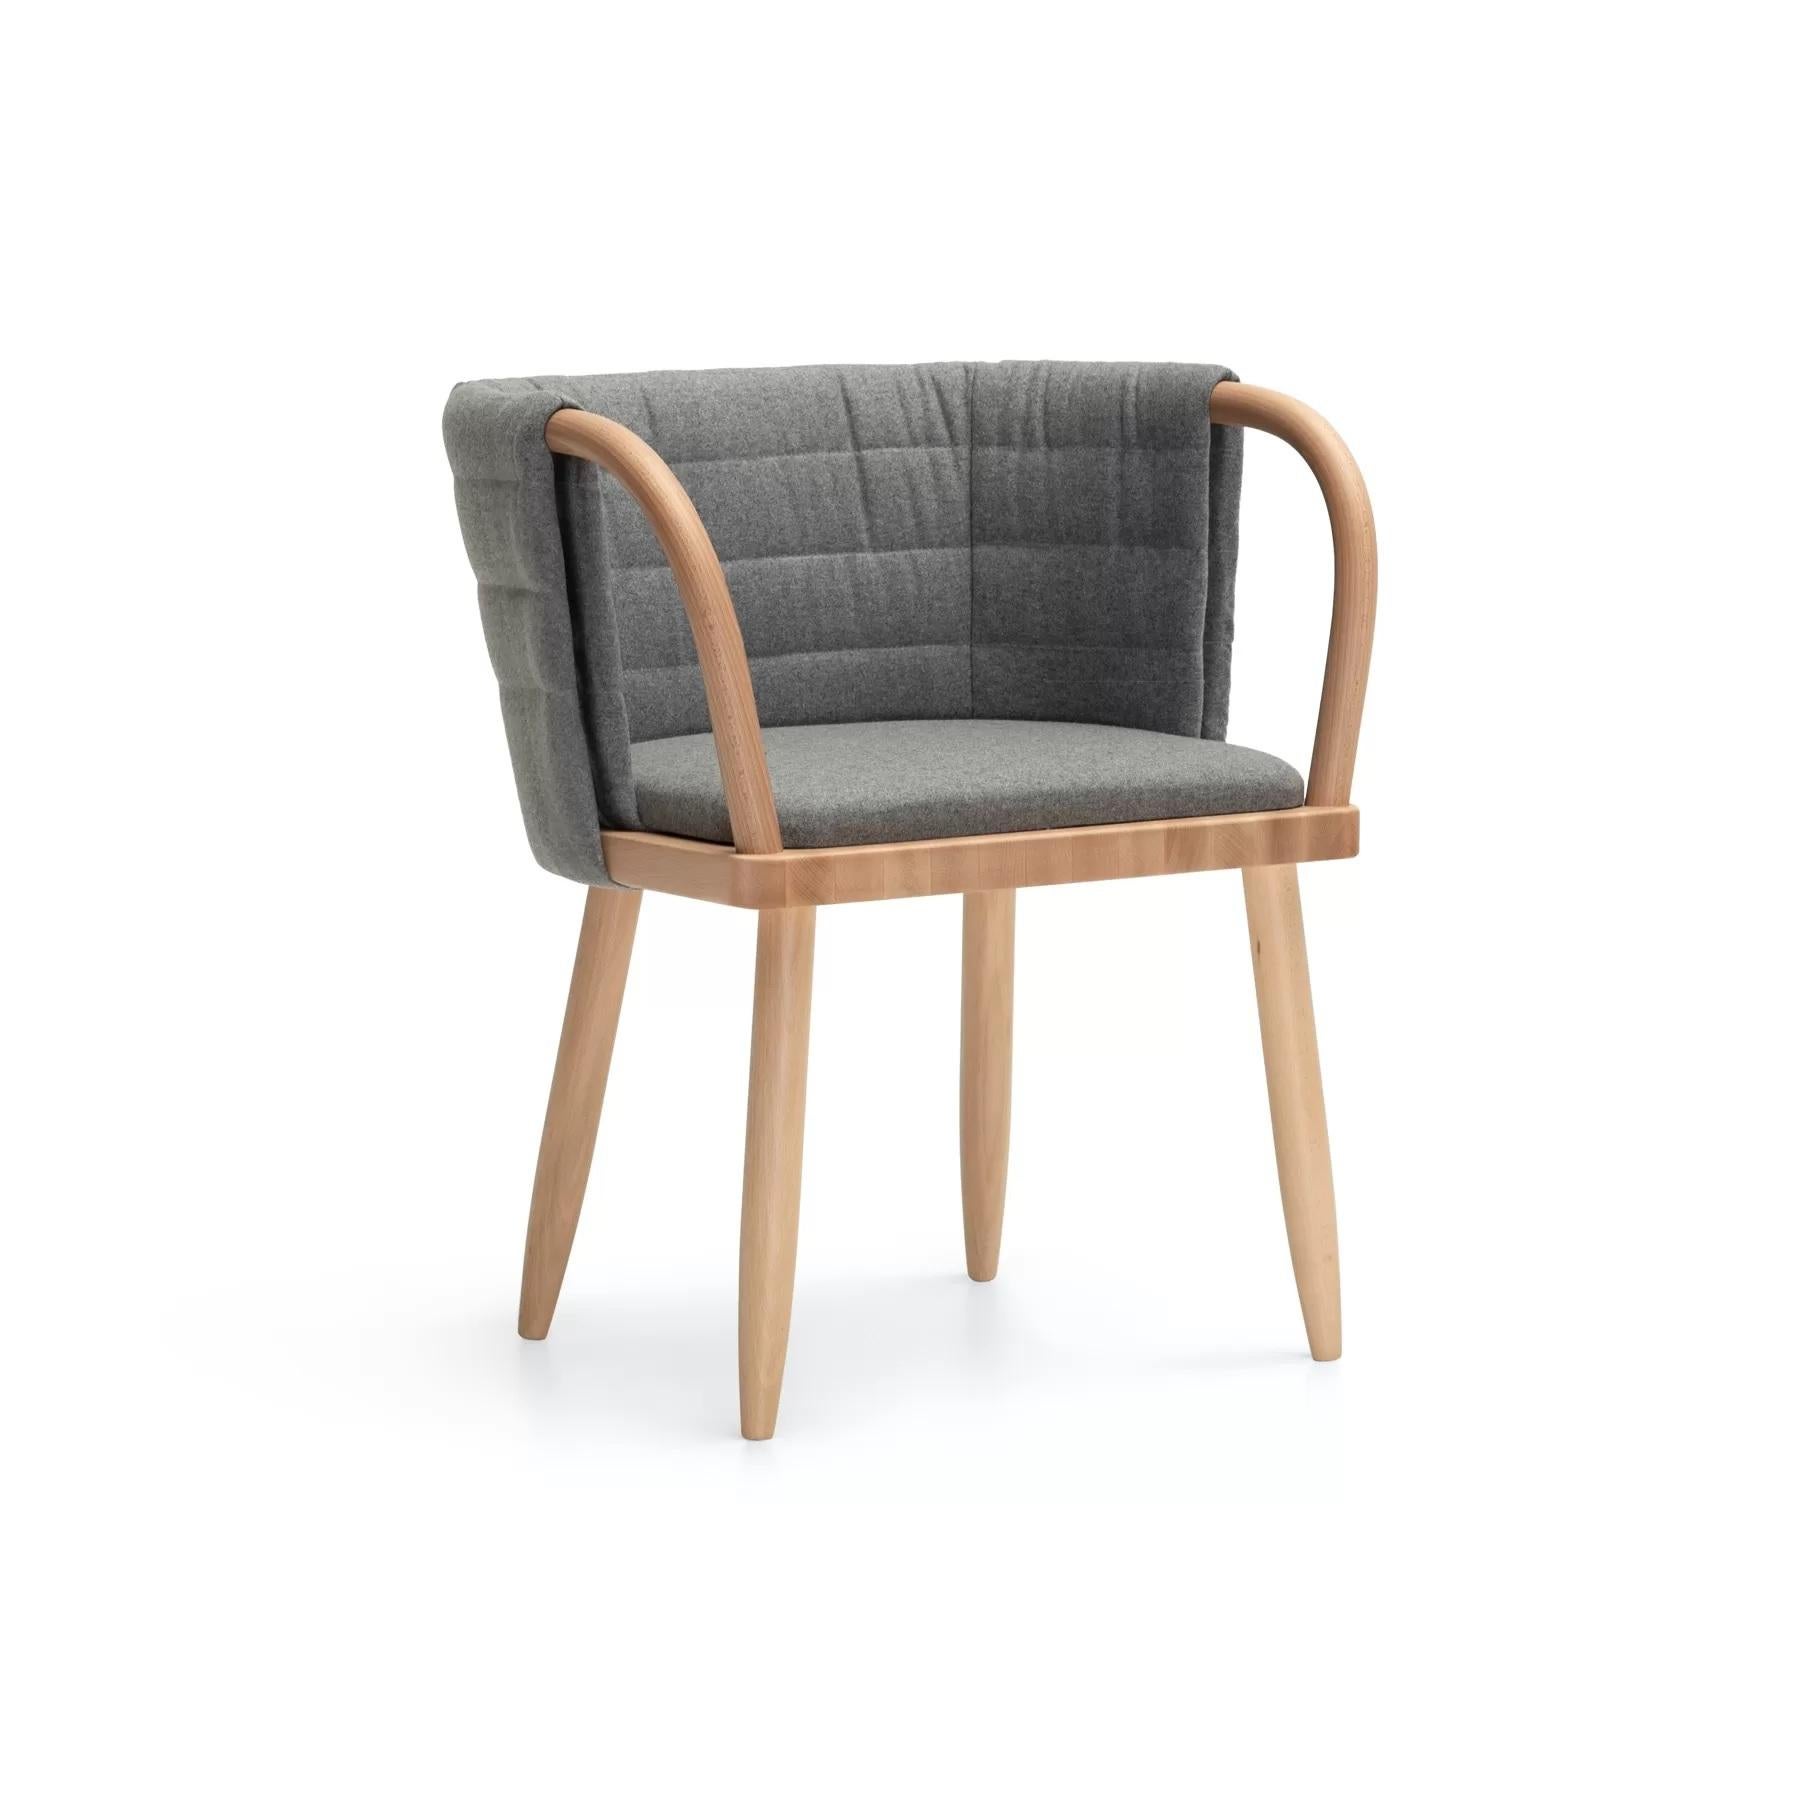 Structure and frame
Seat, legs and arms in solid wood. These are assembled on a steel chassis that shapes the backrest. Solid wood plank seat with high-density rubber surface ensures optimal sitting.
Backrest:
Steel tube structure assembled to